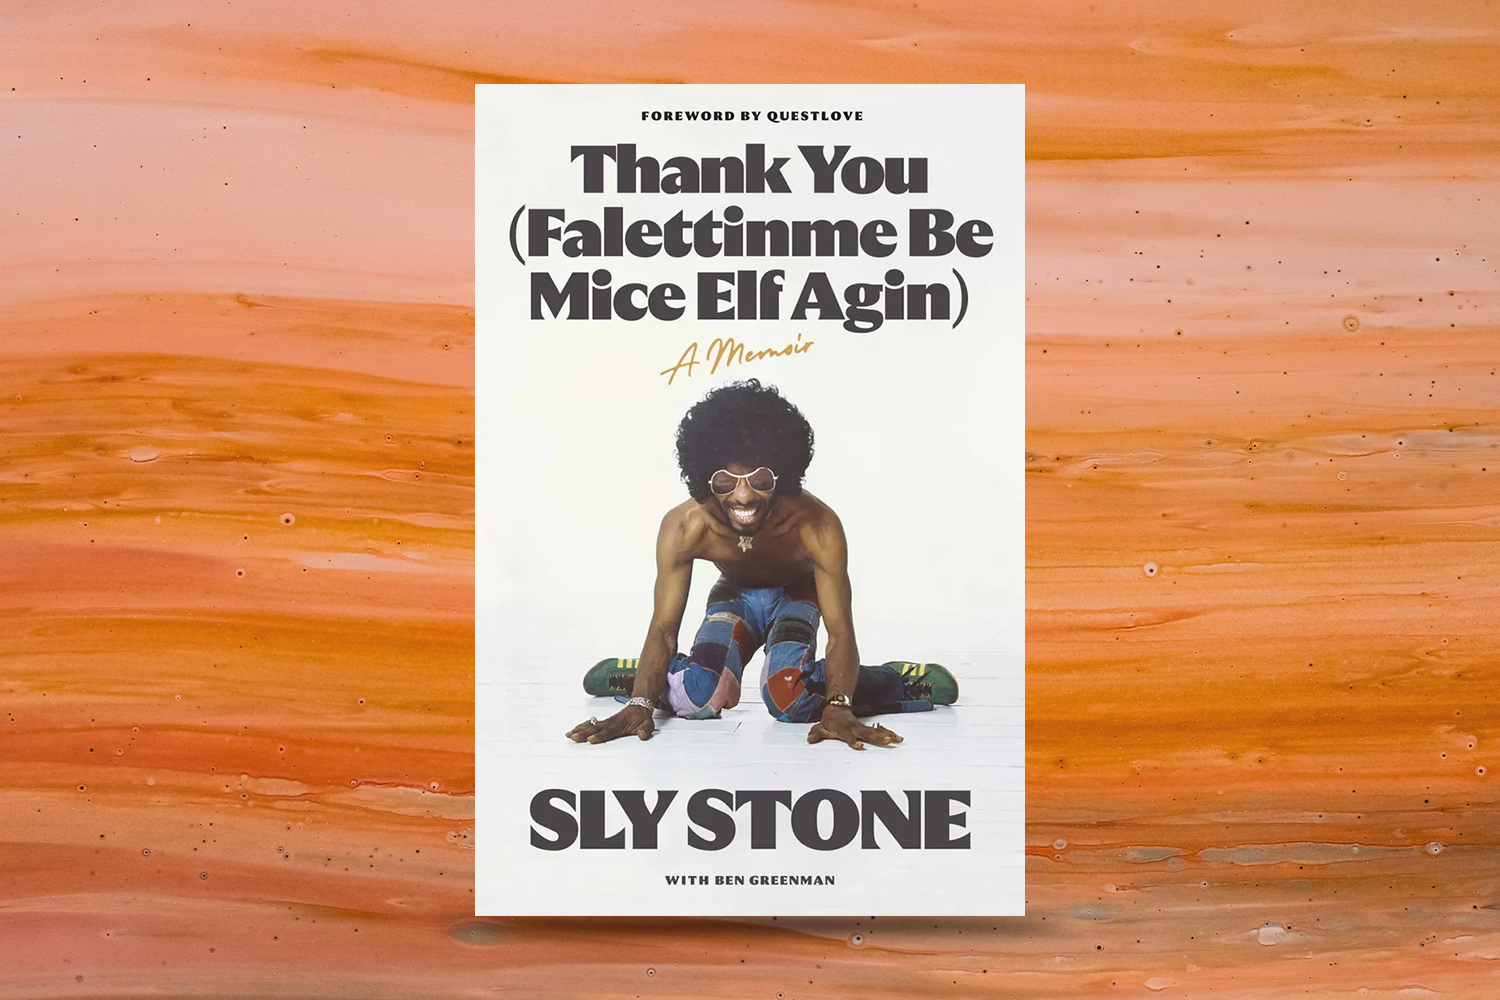 Sly Stone with Ben Greenman, Thank You (Falettinme Be Mice Elf Agin)